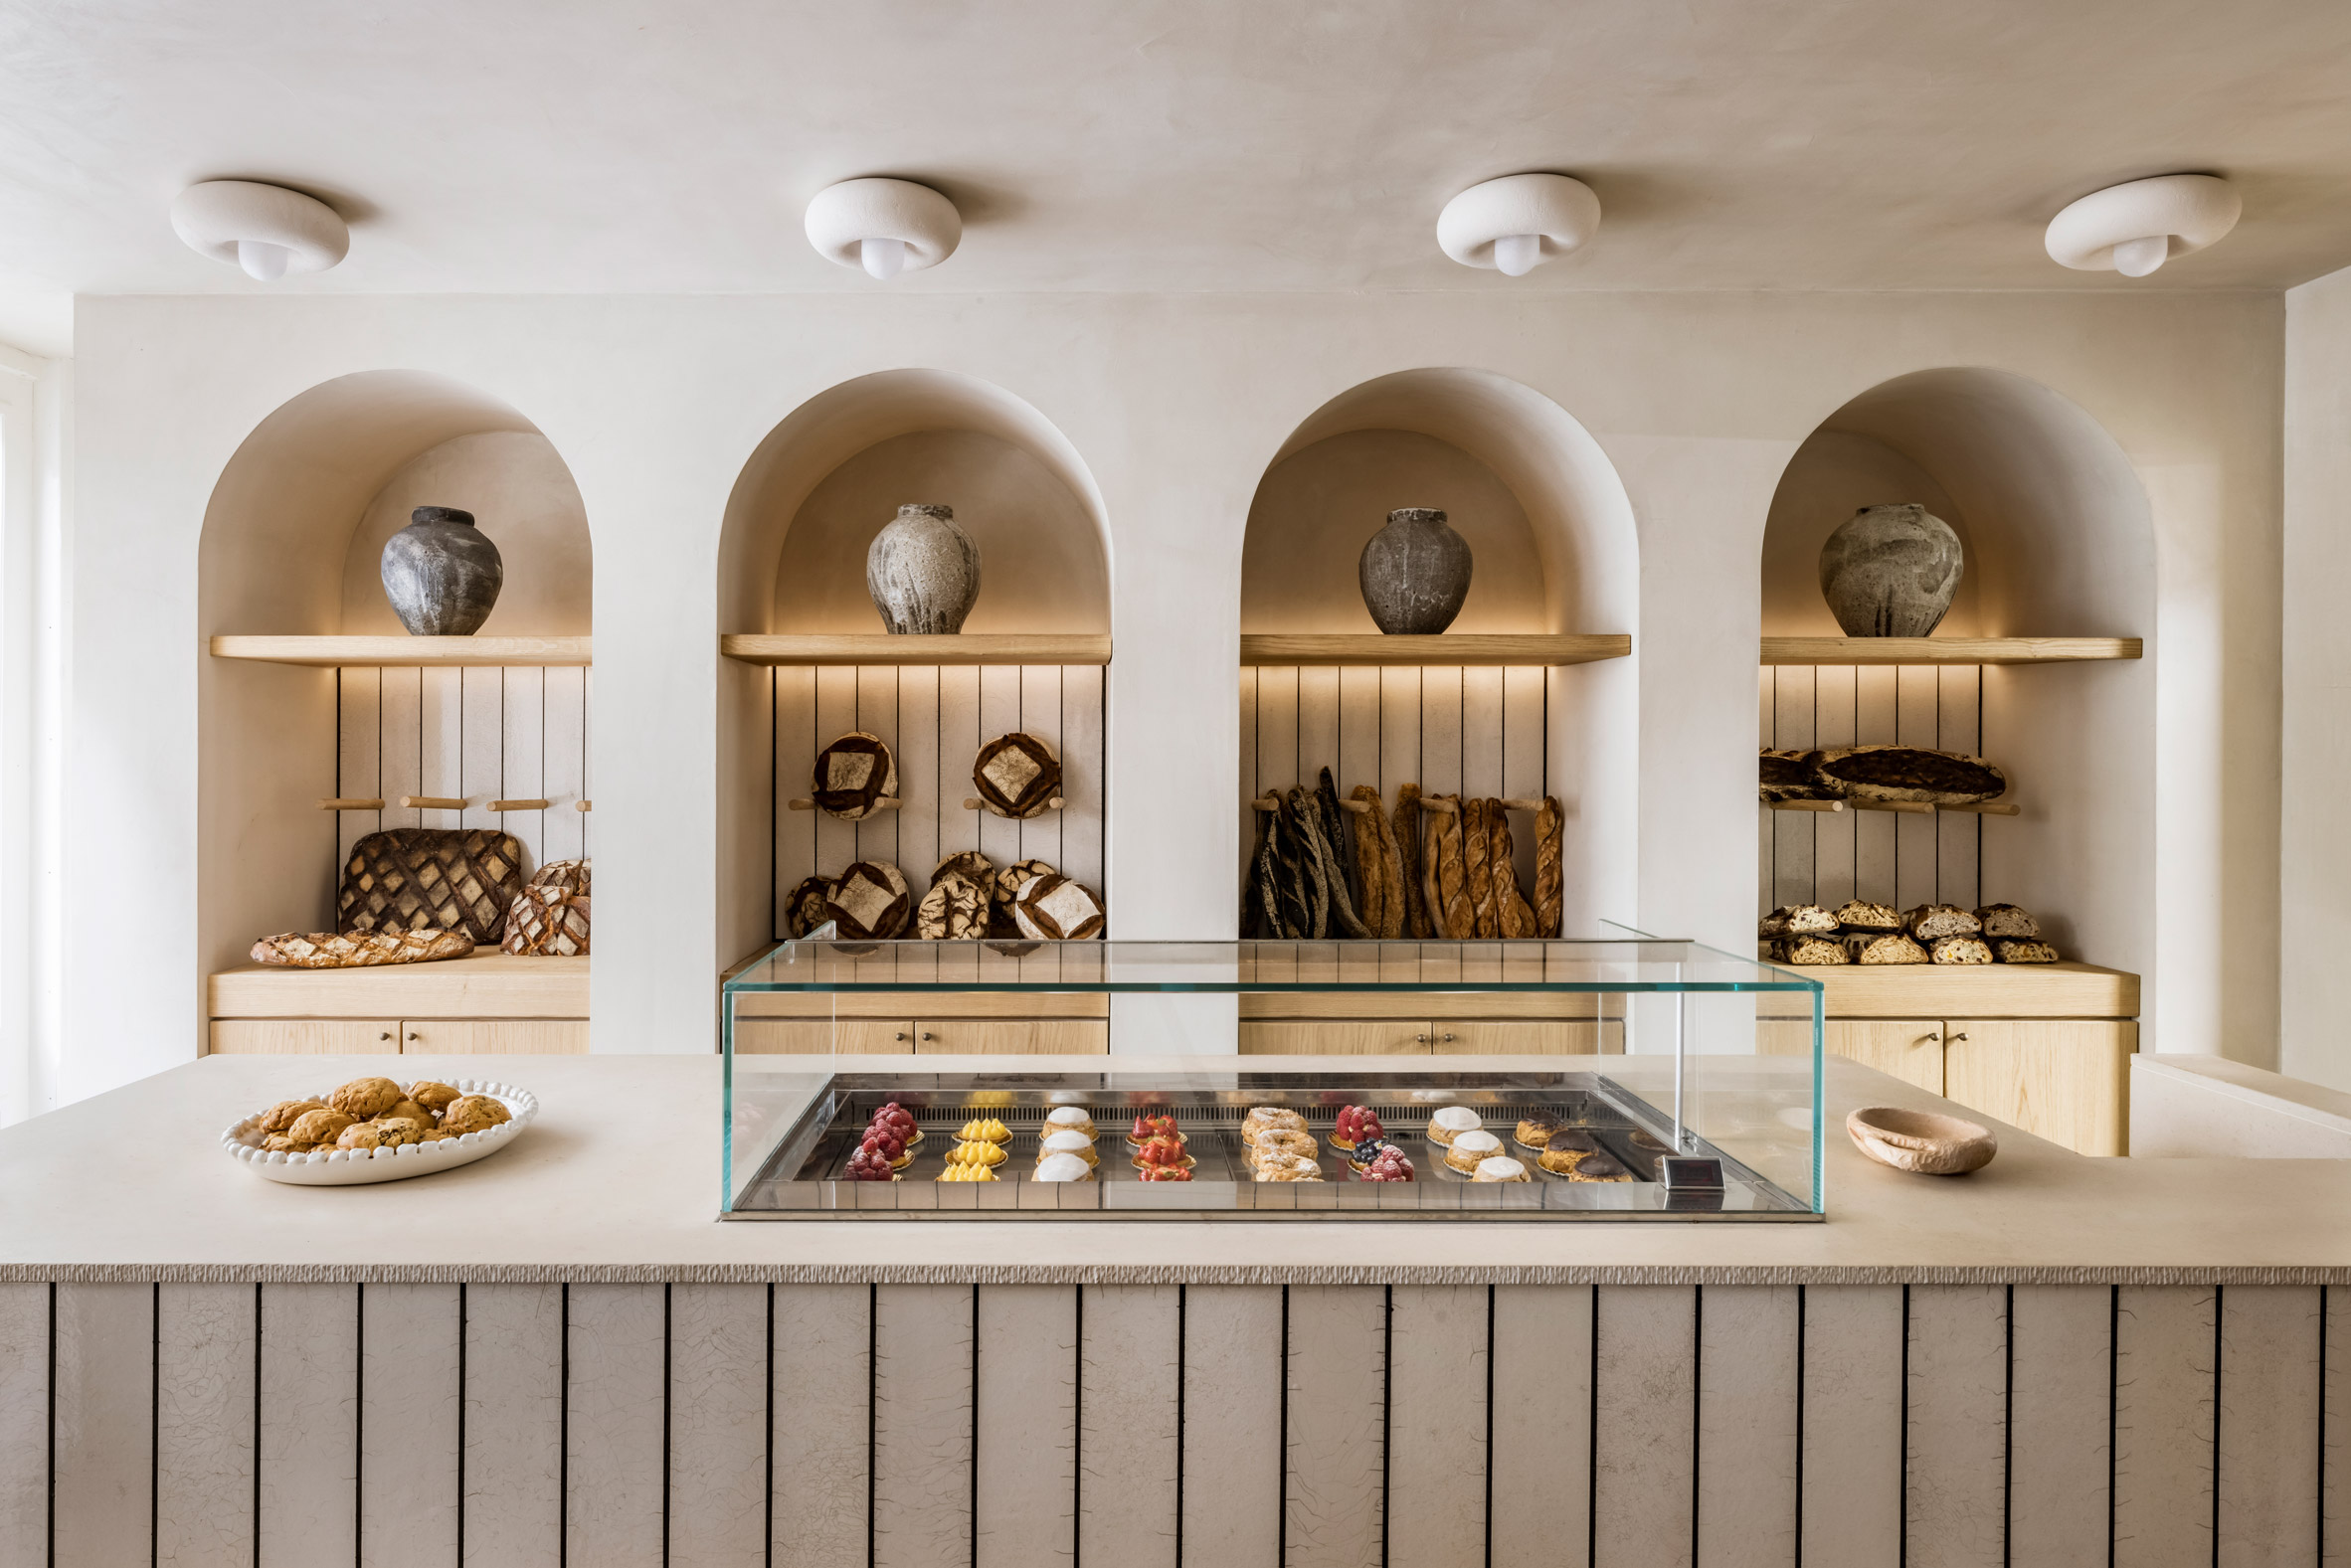 Liberte bakery in Paris with arched alcoves displaying baked goods